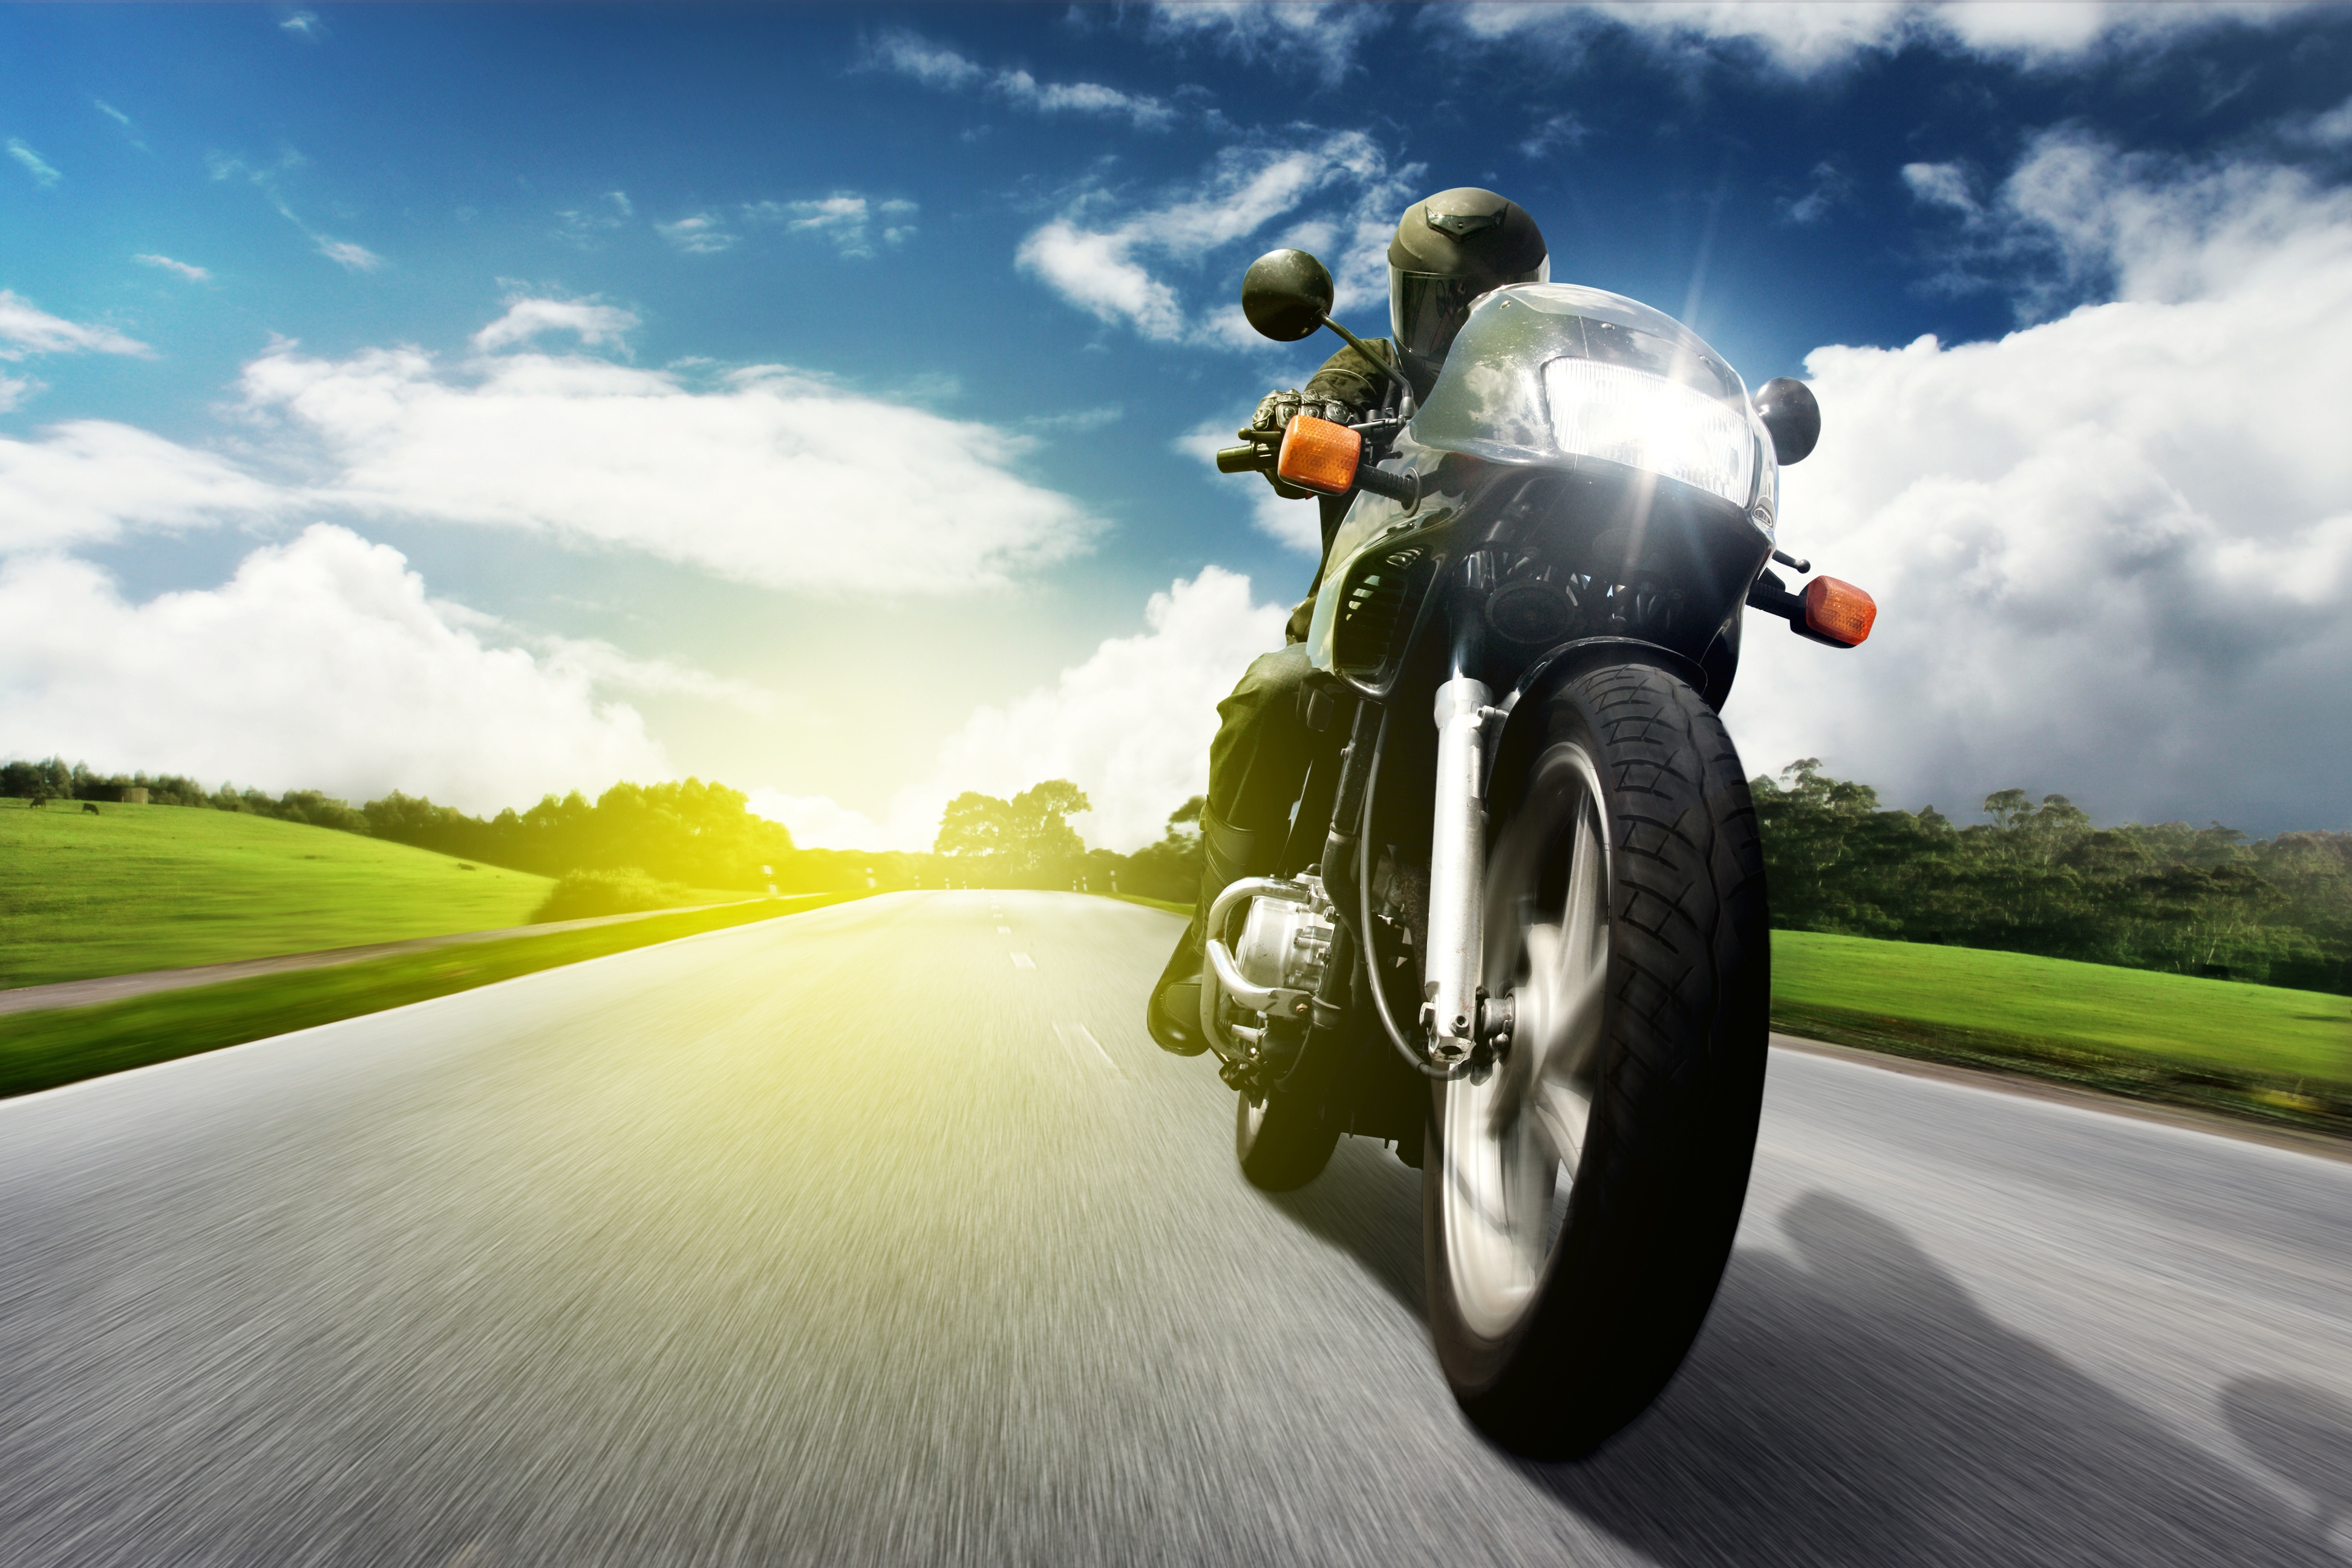 Phone Background movement, road, motorcycles, motorcycle